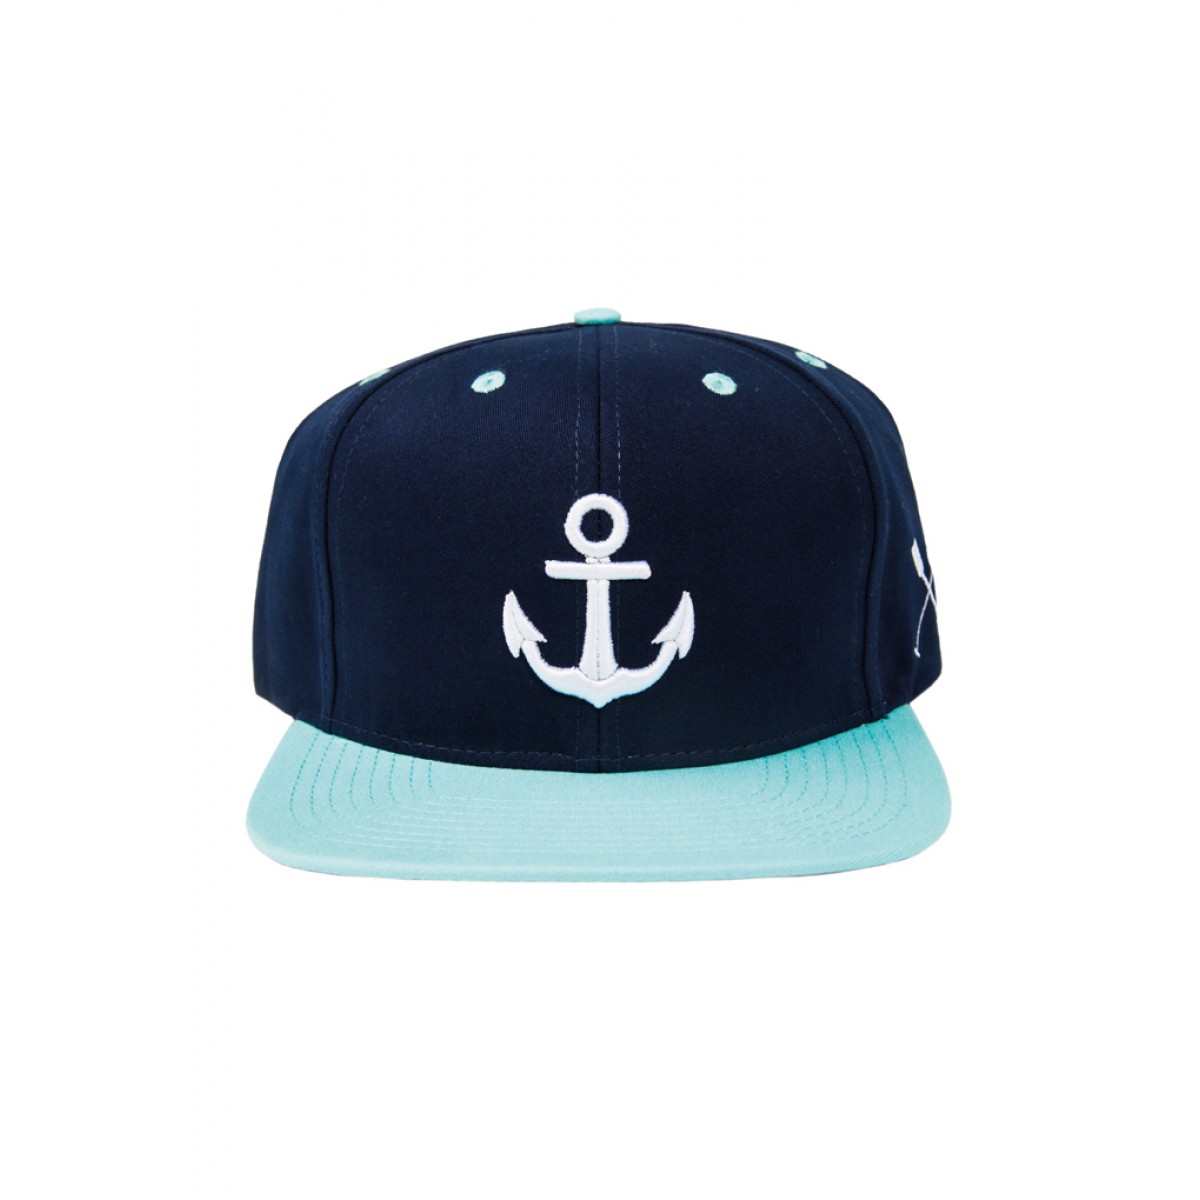 HOME IS WHERE YOUR HEART IS. - WONDERLAND SNAPBACK
(NAVY BLUE/MINT)